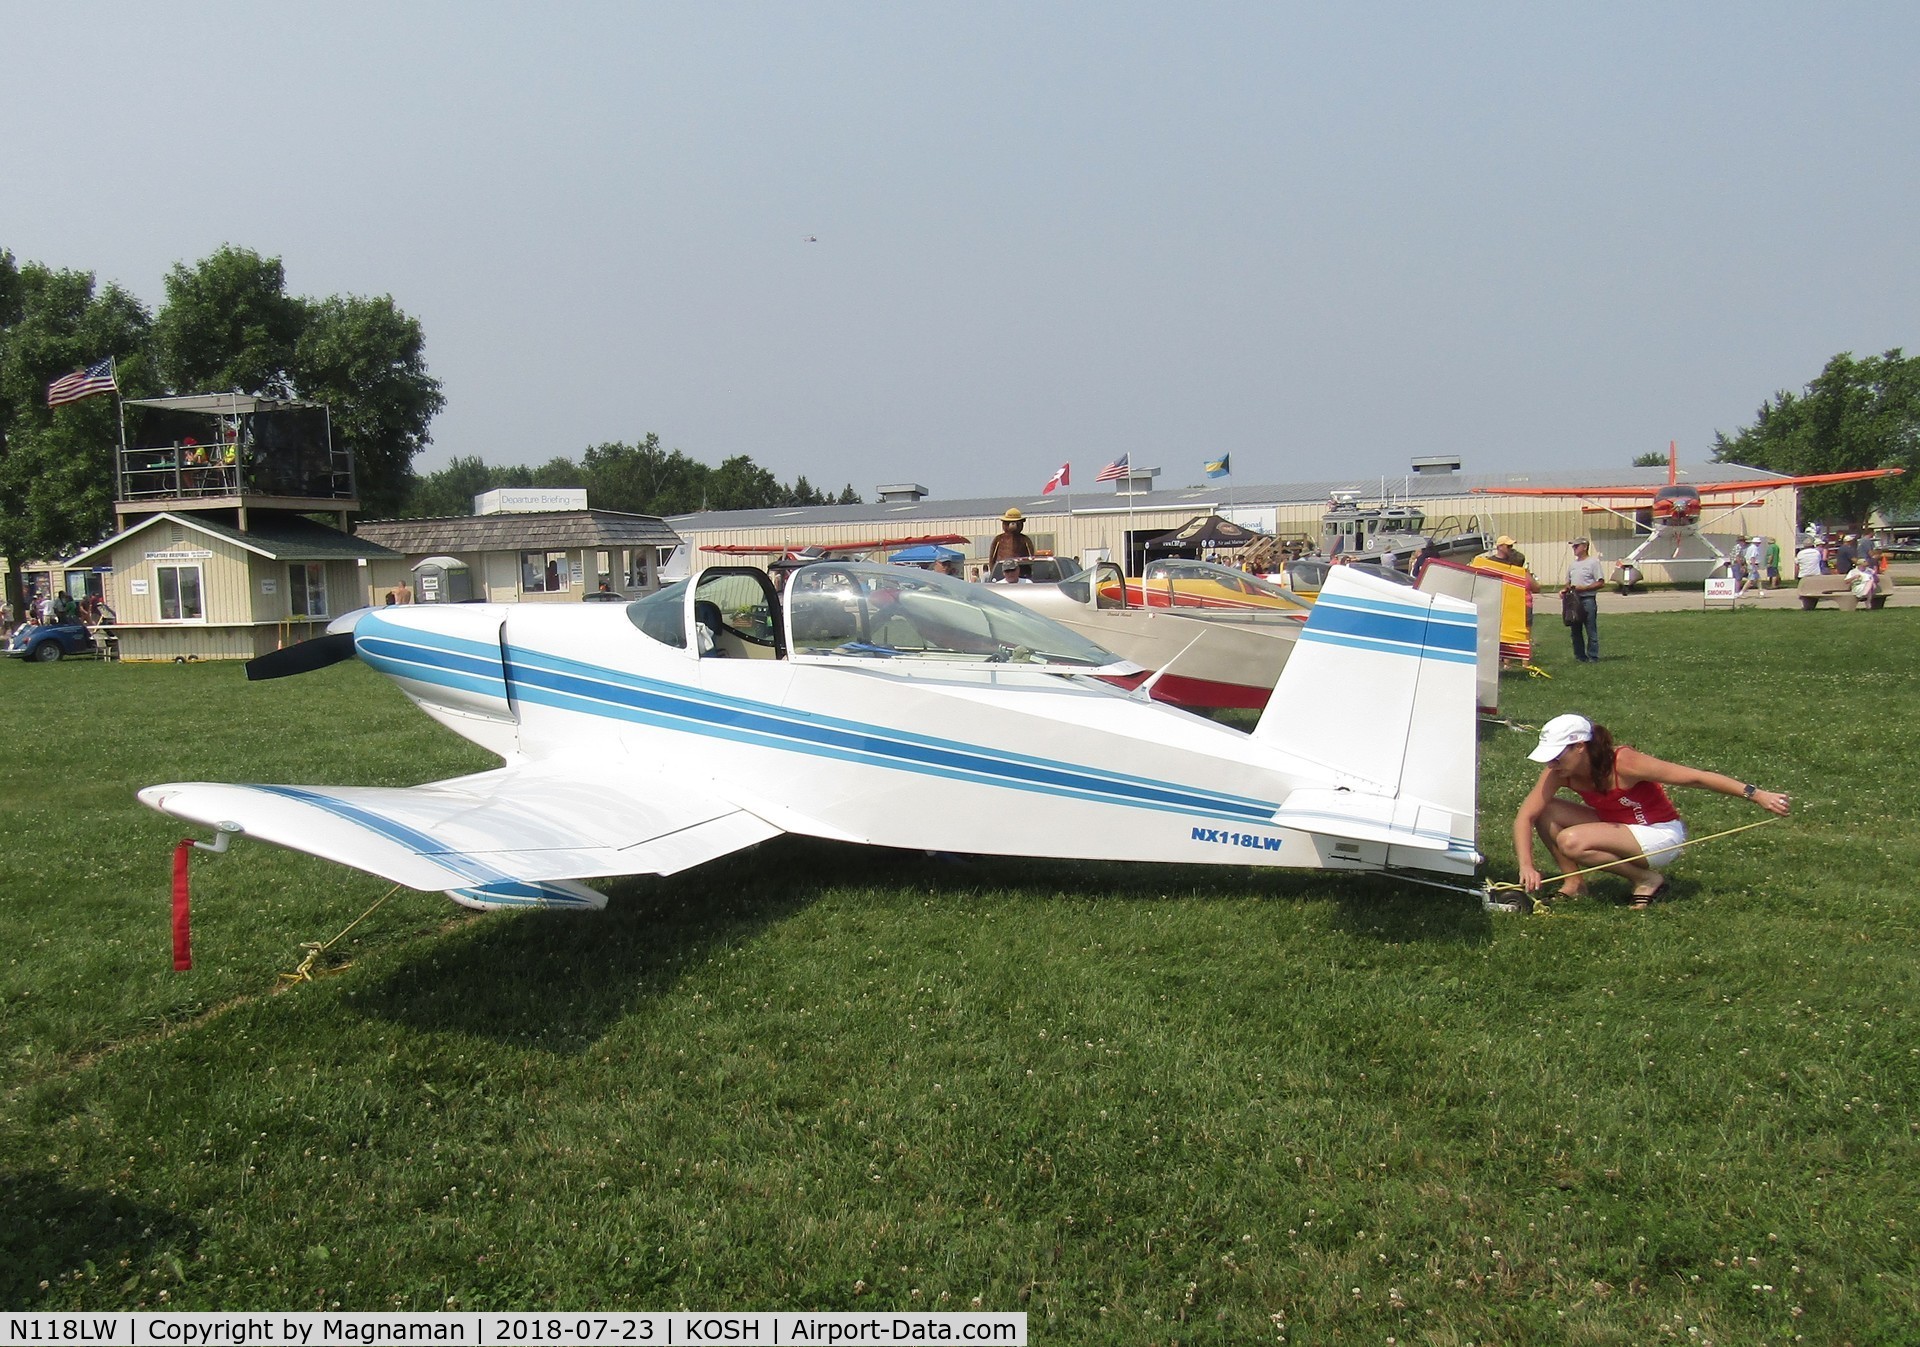 N118LW, 2014 Thorp T-18 Tiger C/N 836, tied up at EAA 18